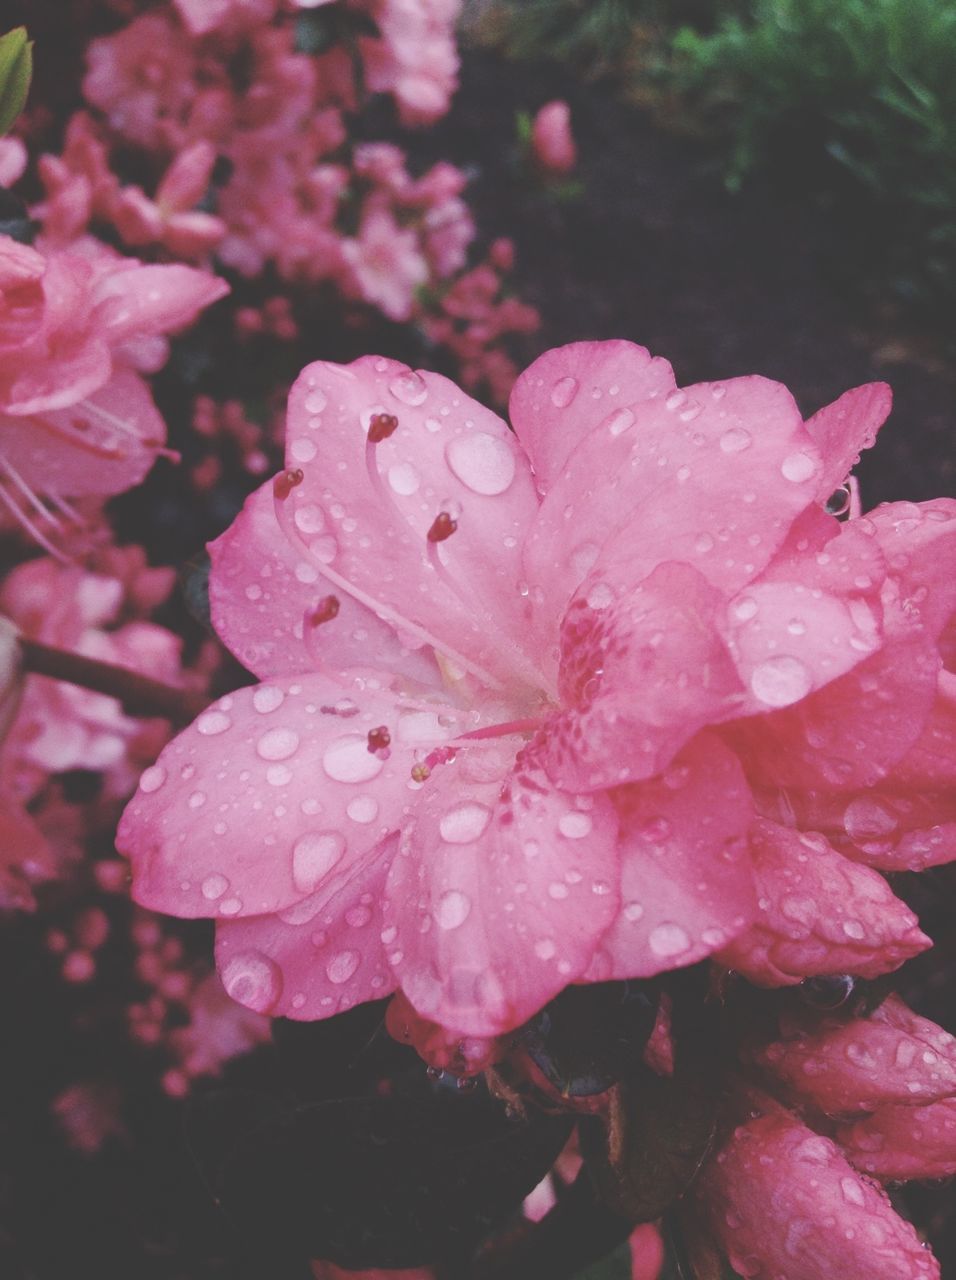 flower, freshness, petal, drop, fragility, water, wet, flower head, growth, beauty in nature, close-up, pink color, blooming, nature, dew, raindrop, plant, rain, in bloom, focus on foreground